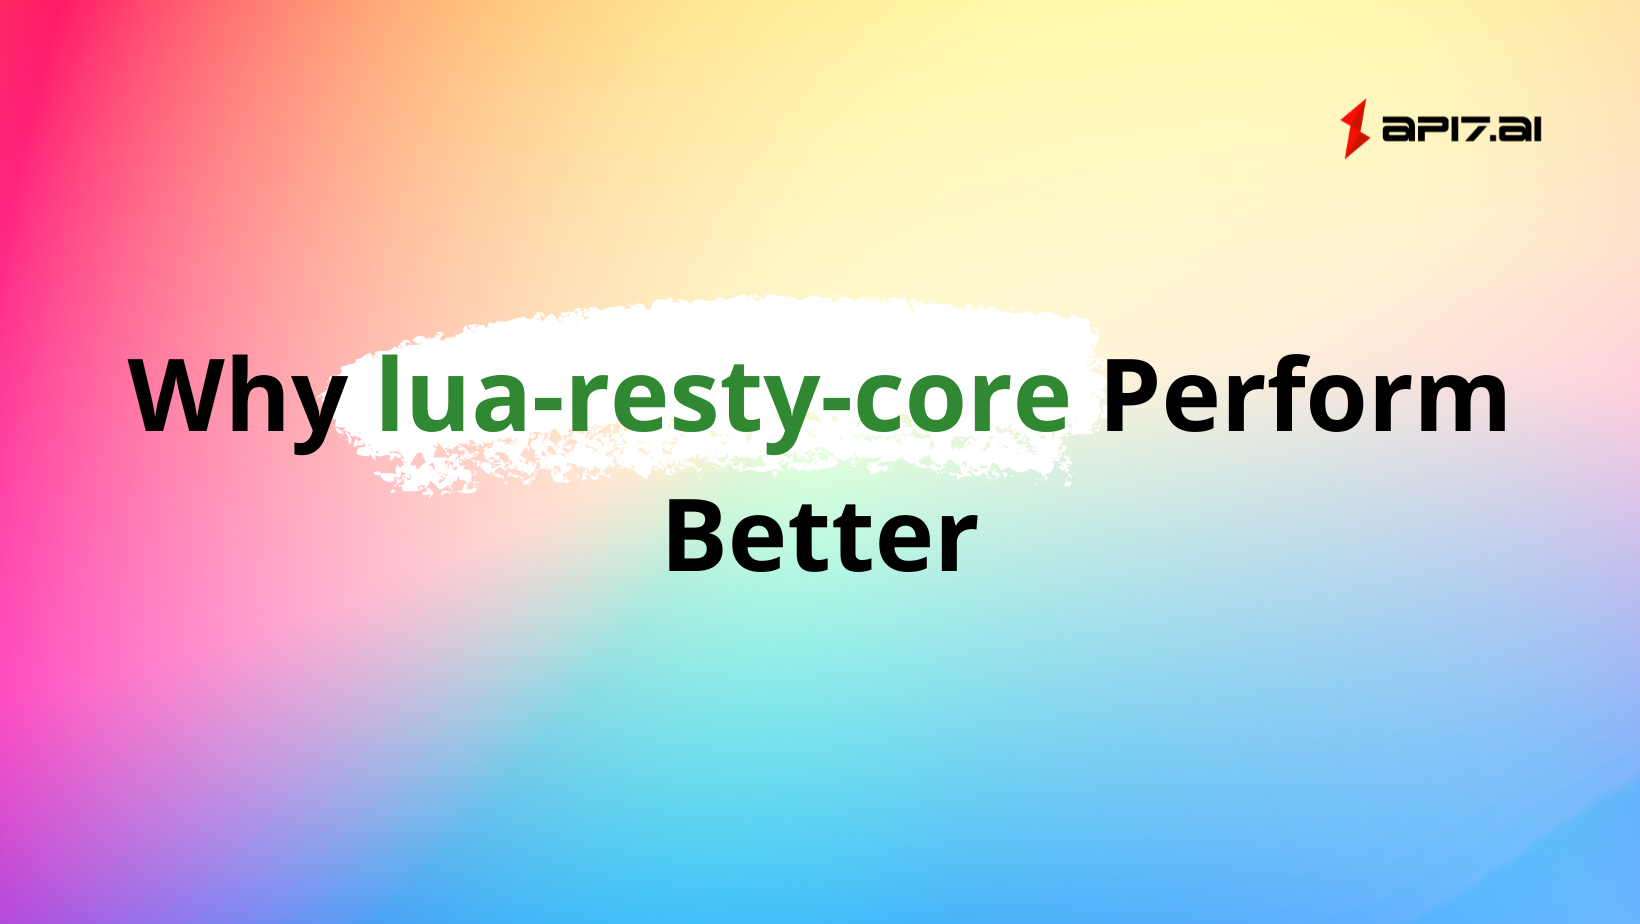 Why Does lua-resty-core Perform Better？